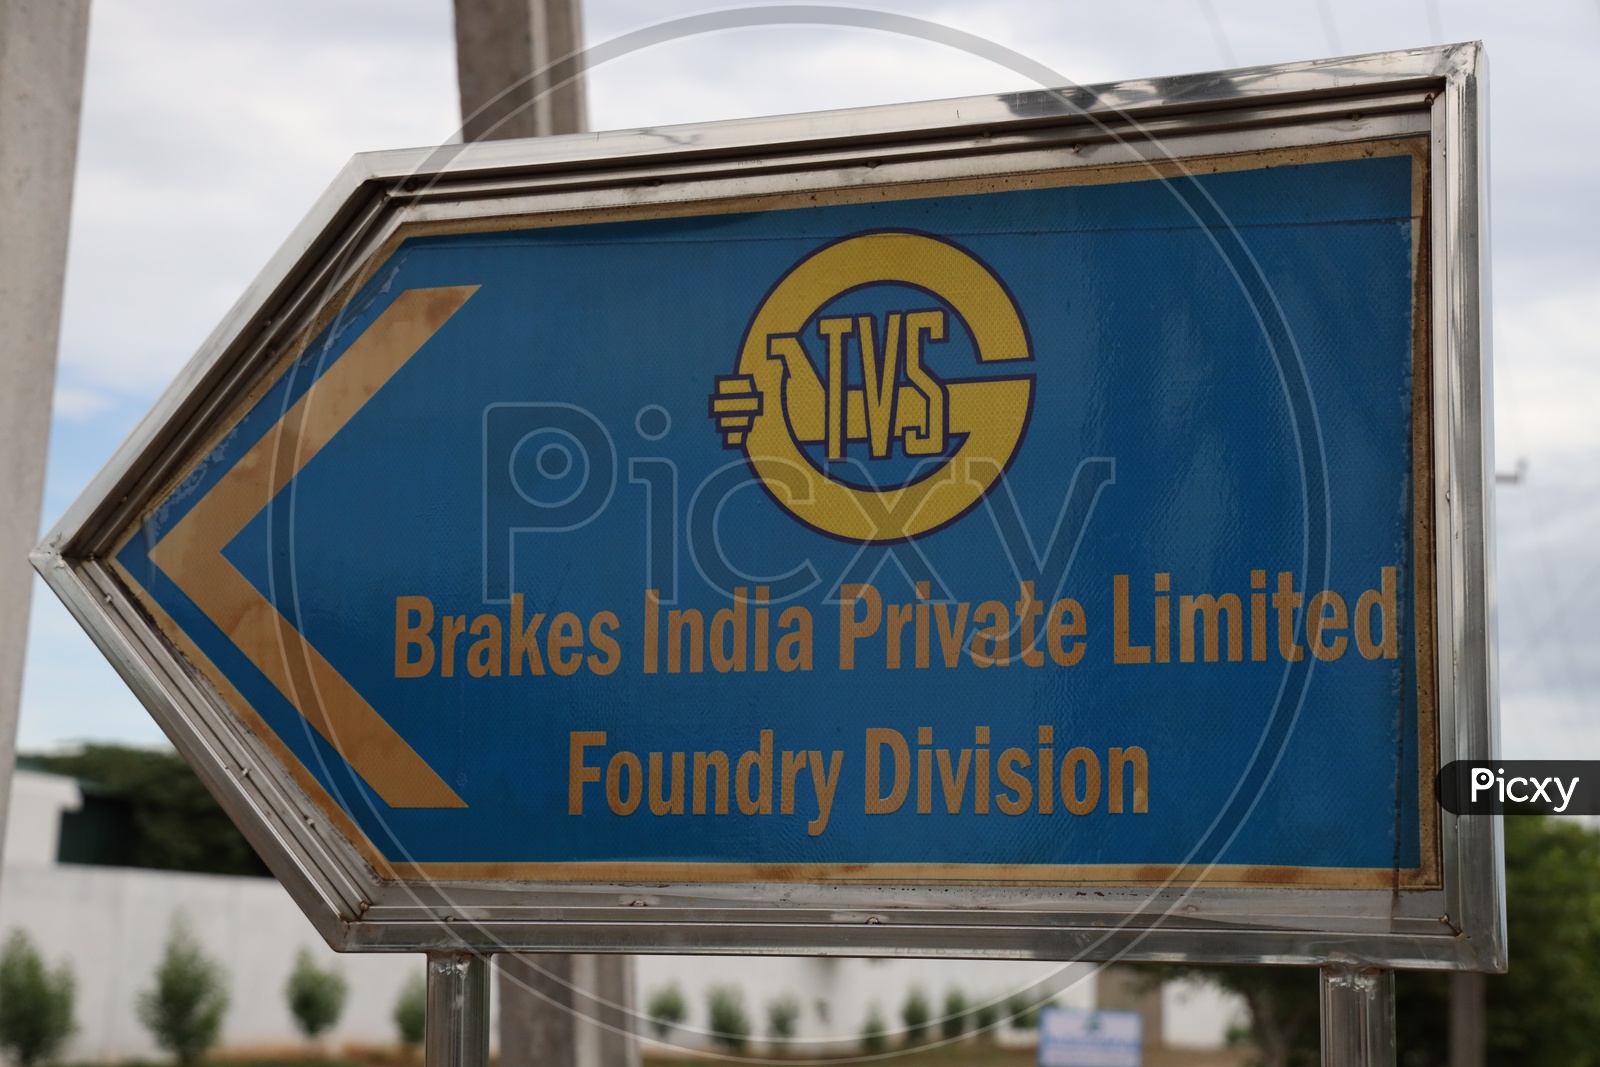 TVS  Brakes India Private Limited  Foundry Division  Name Board